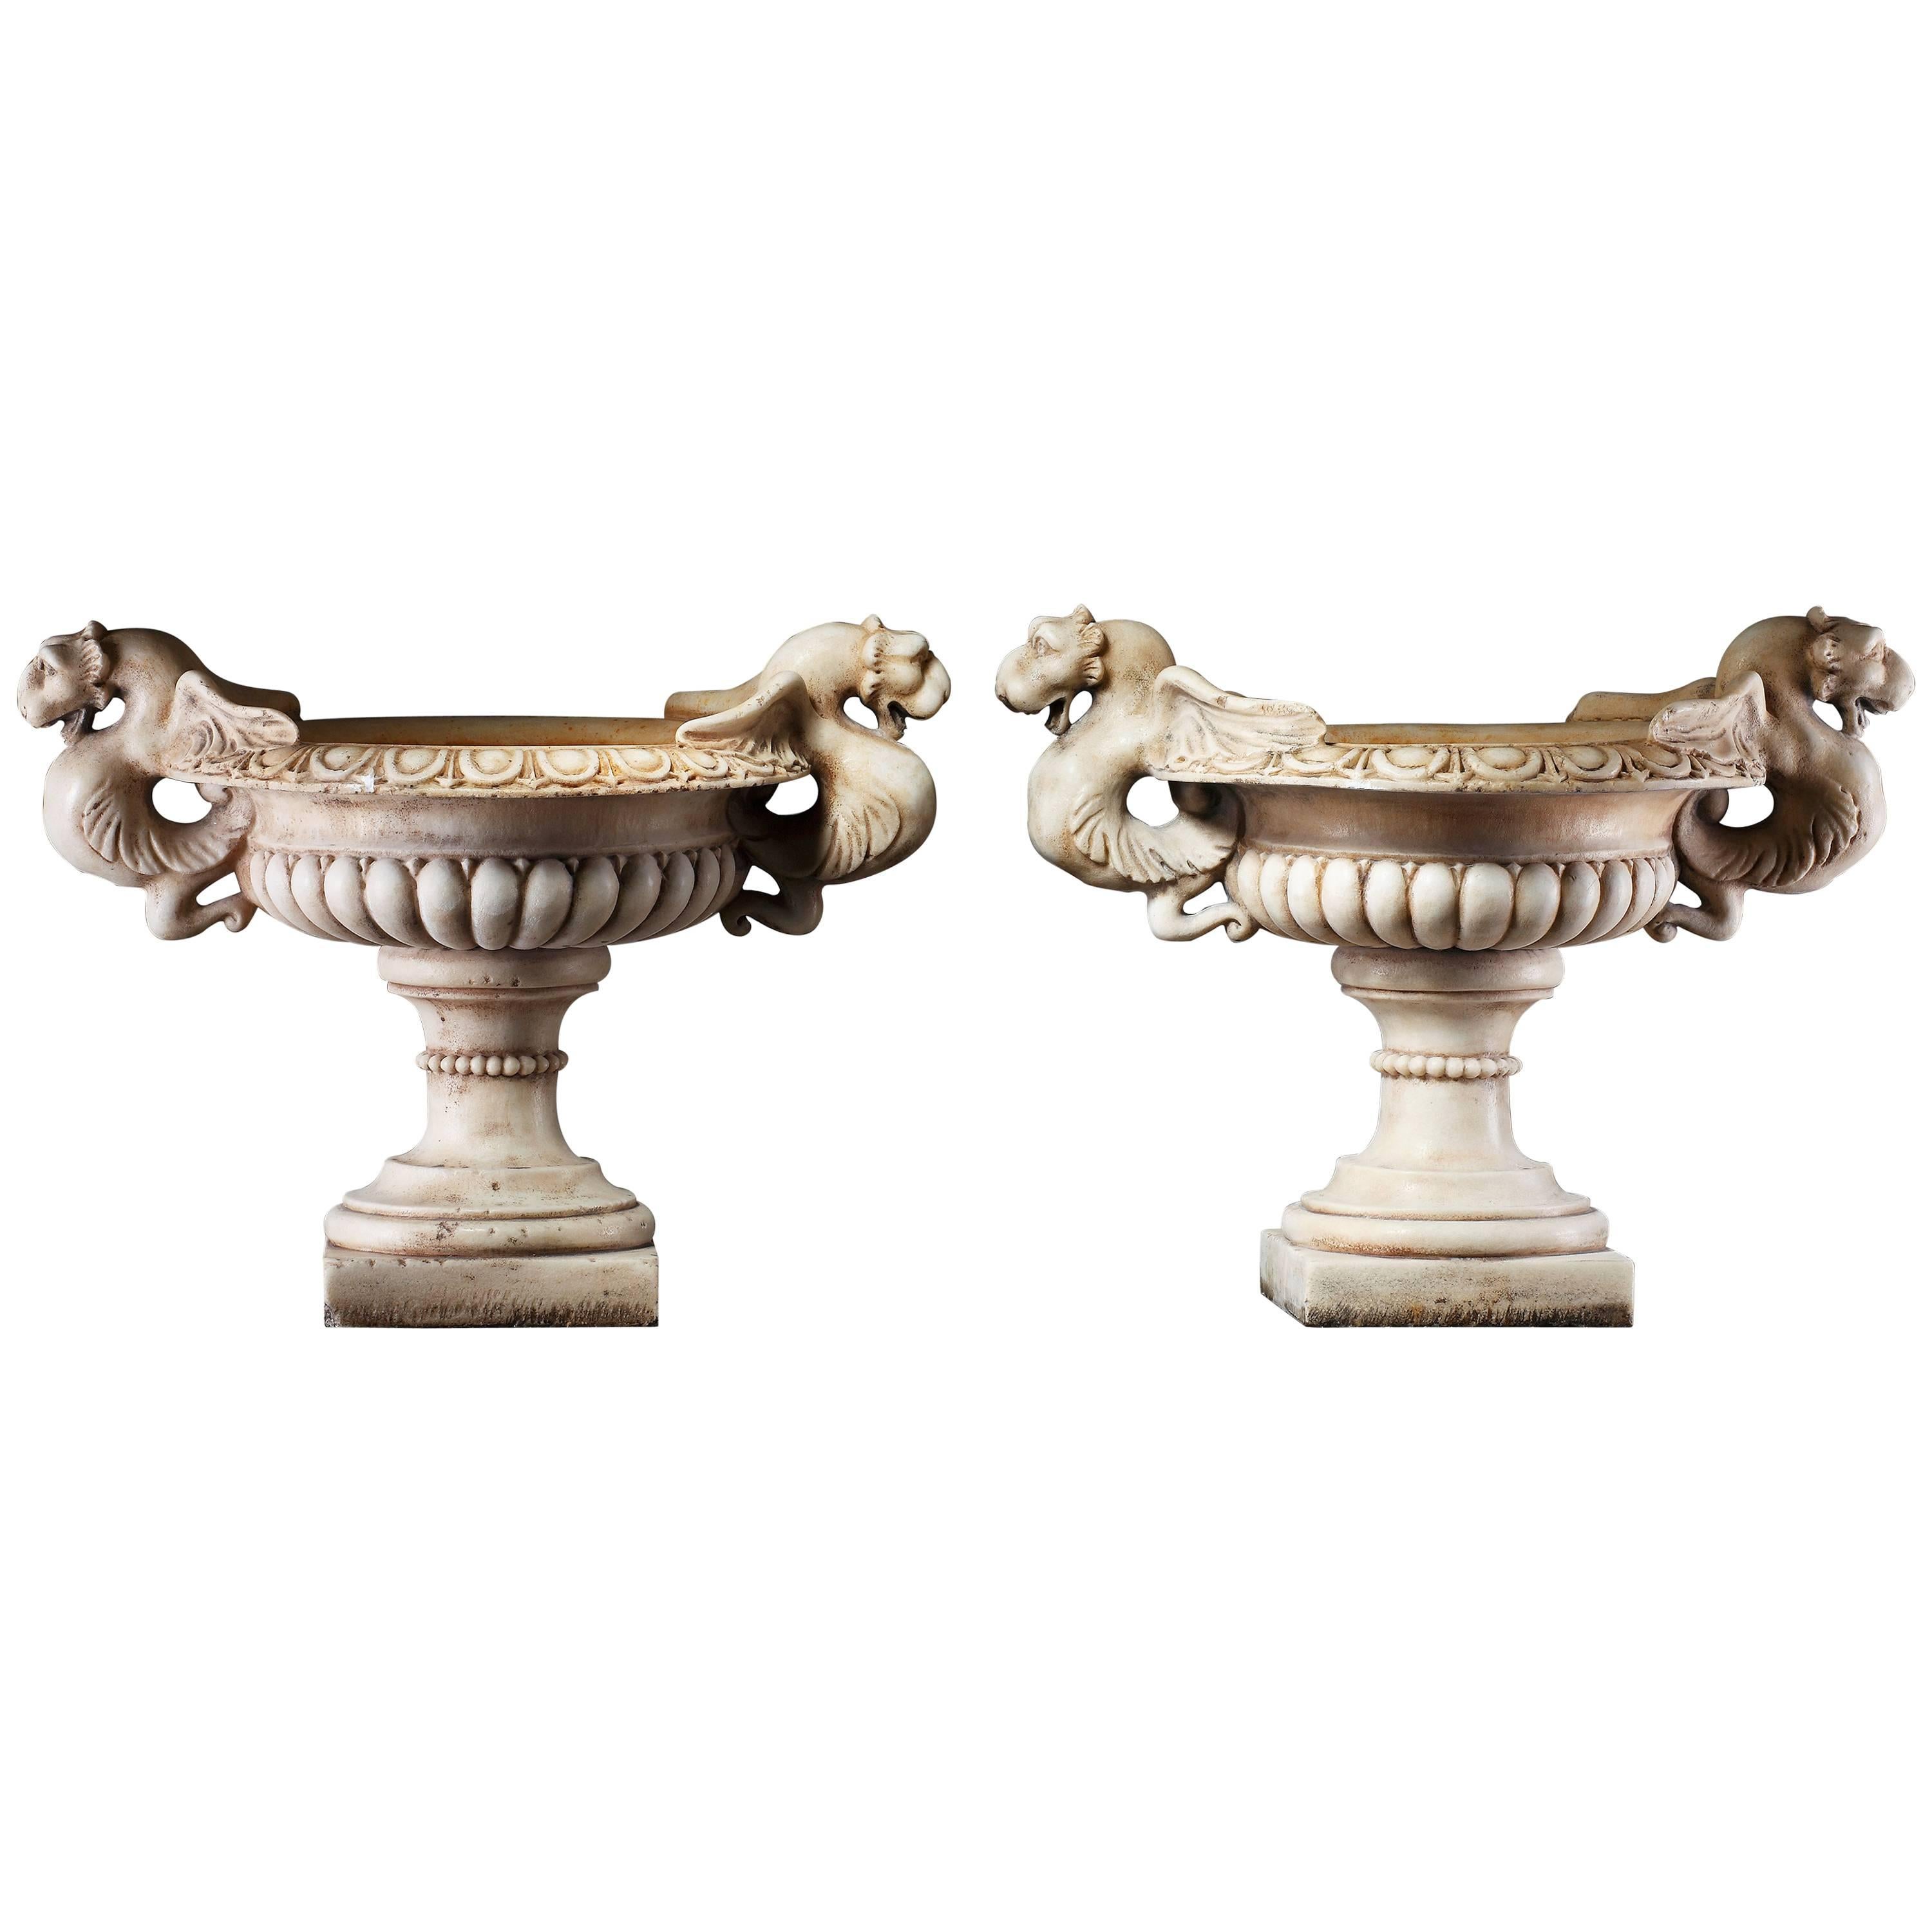 Pair of Continental Sculpted White Marble Garden Urns, 20th Century